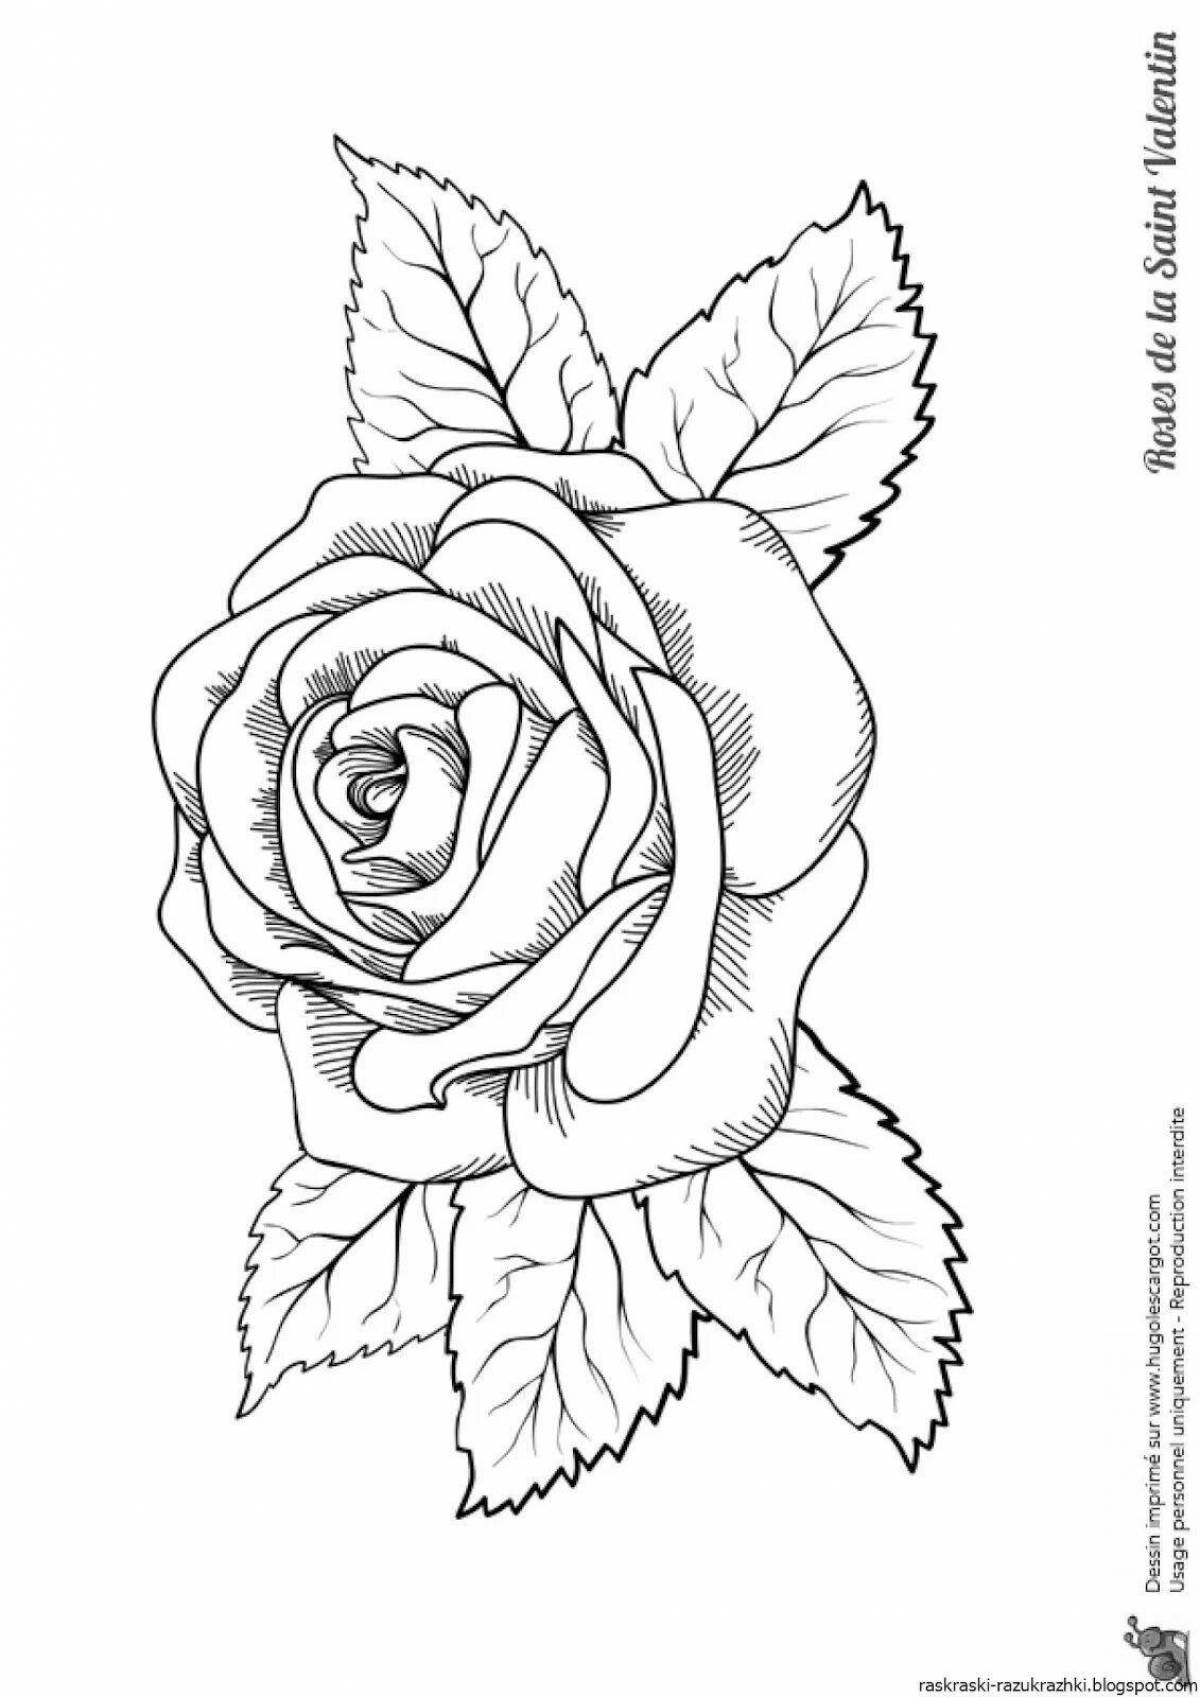 Exquisite coloring drawing of a rose